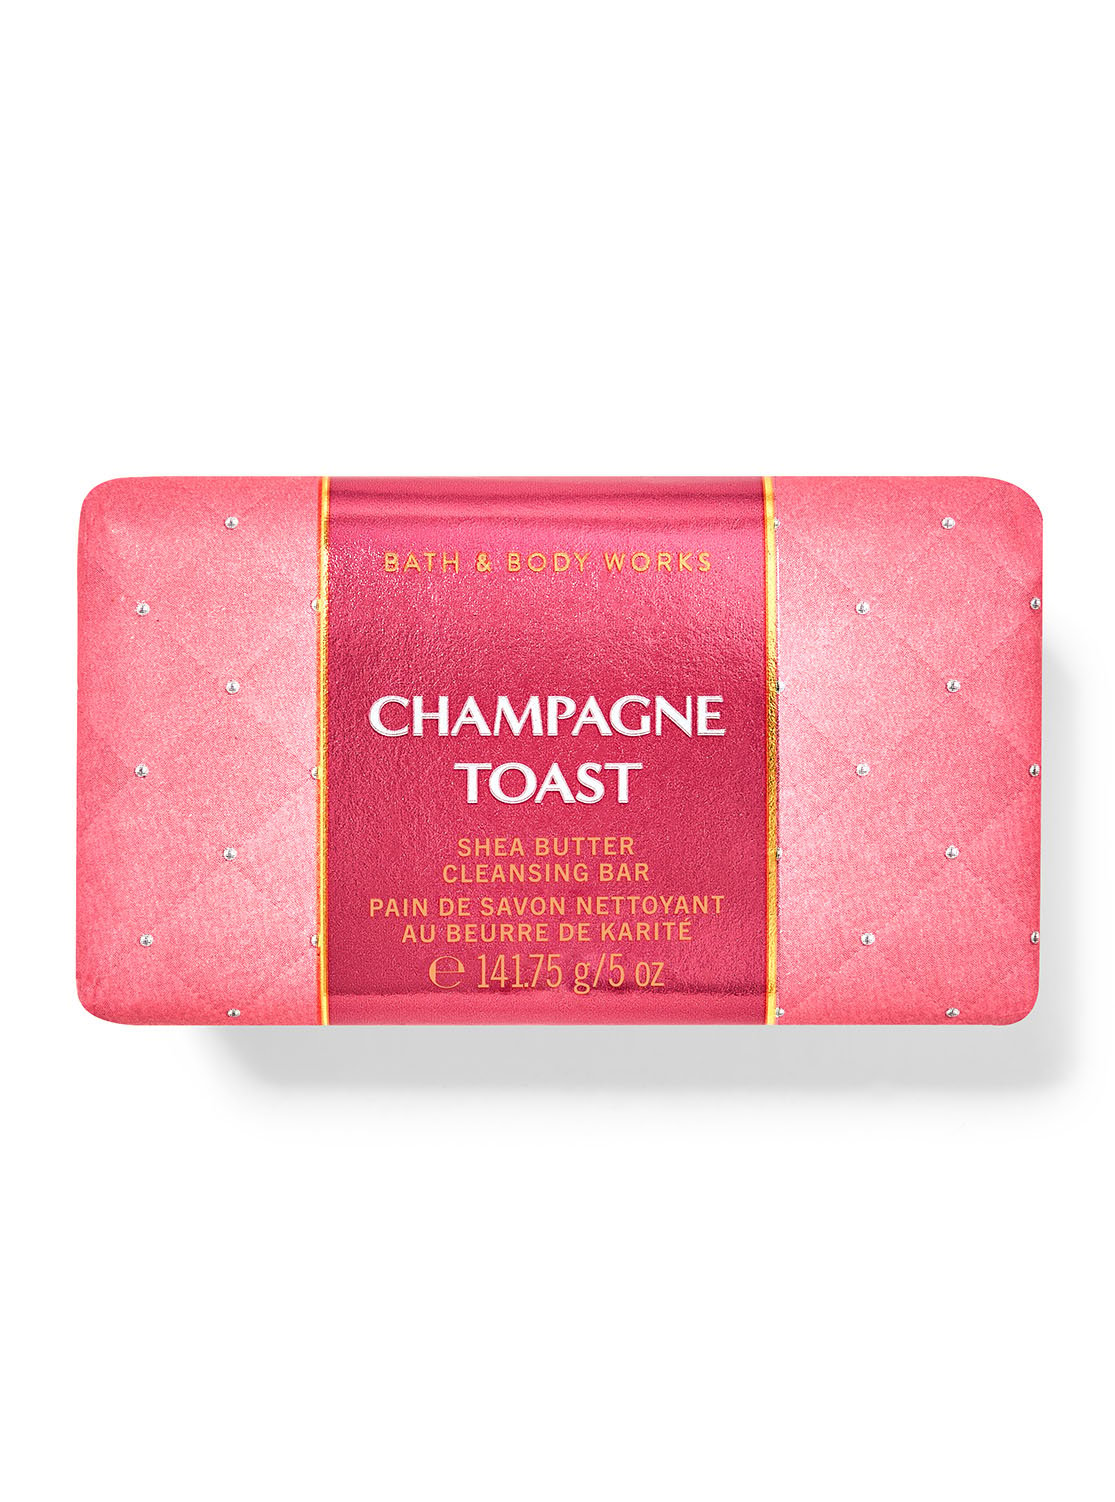 Champagne Toast Shea Butter Cleansing Bar | Bath and Body Works